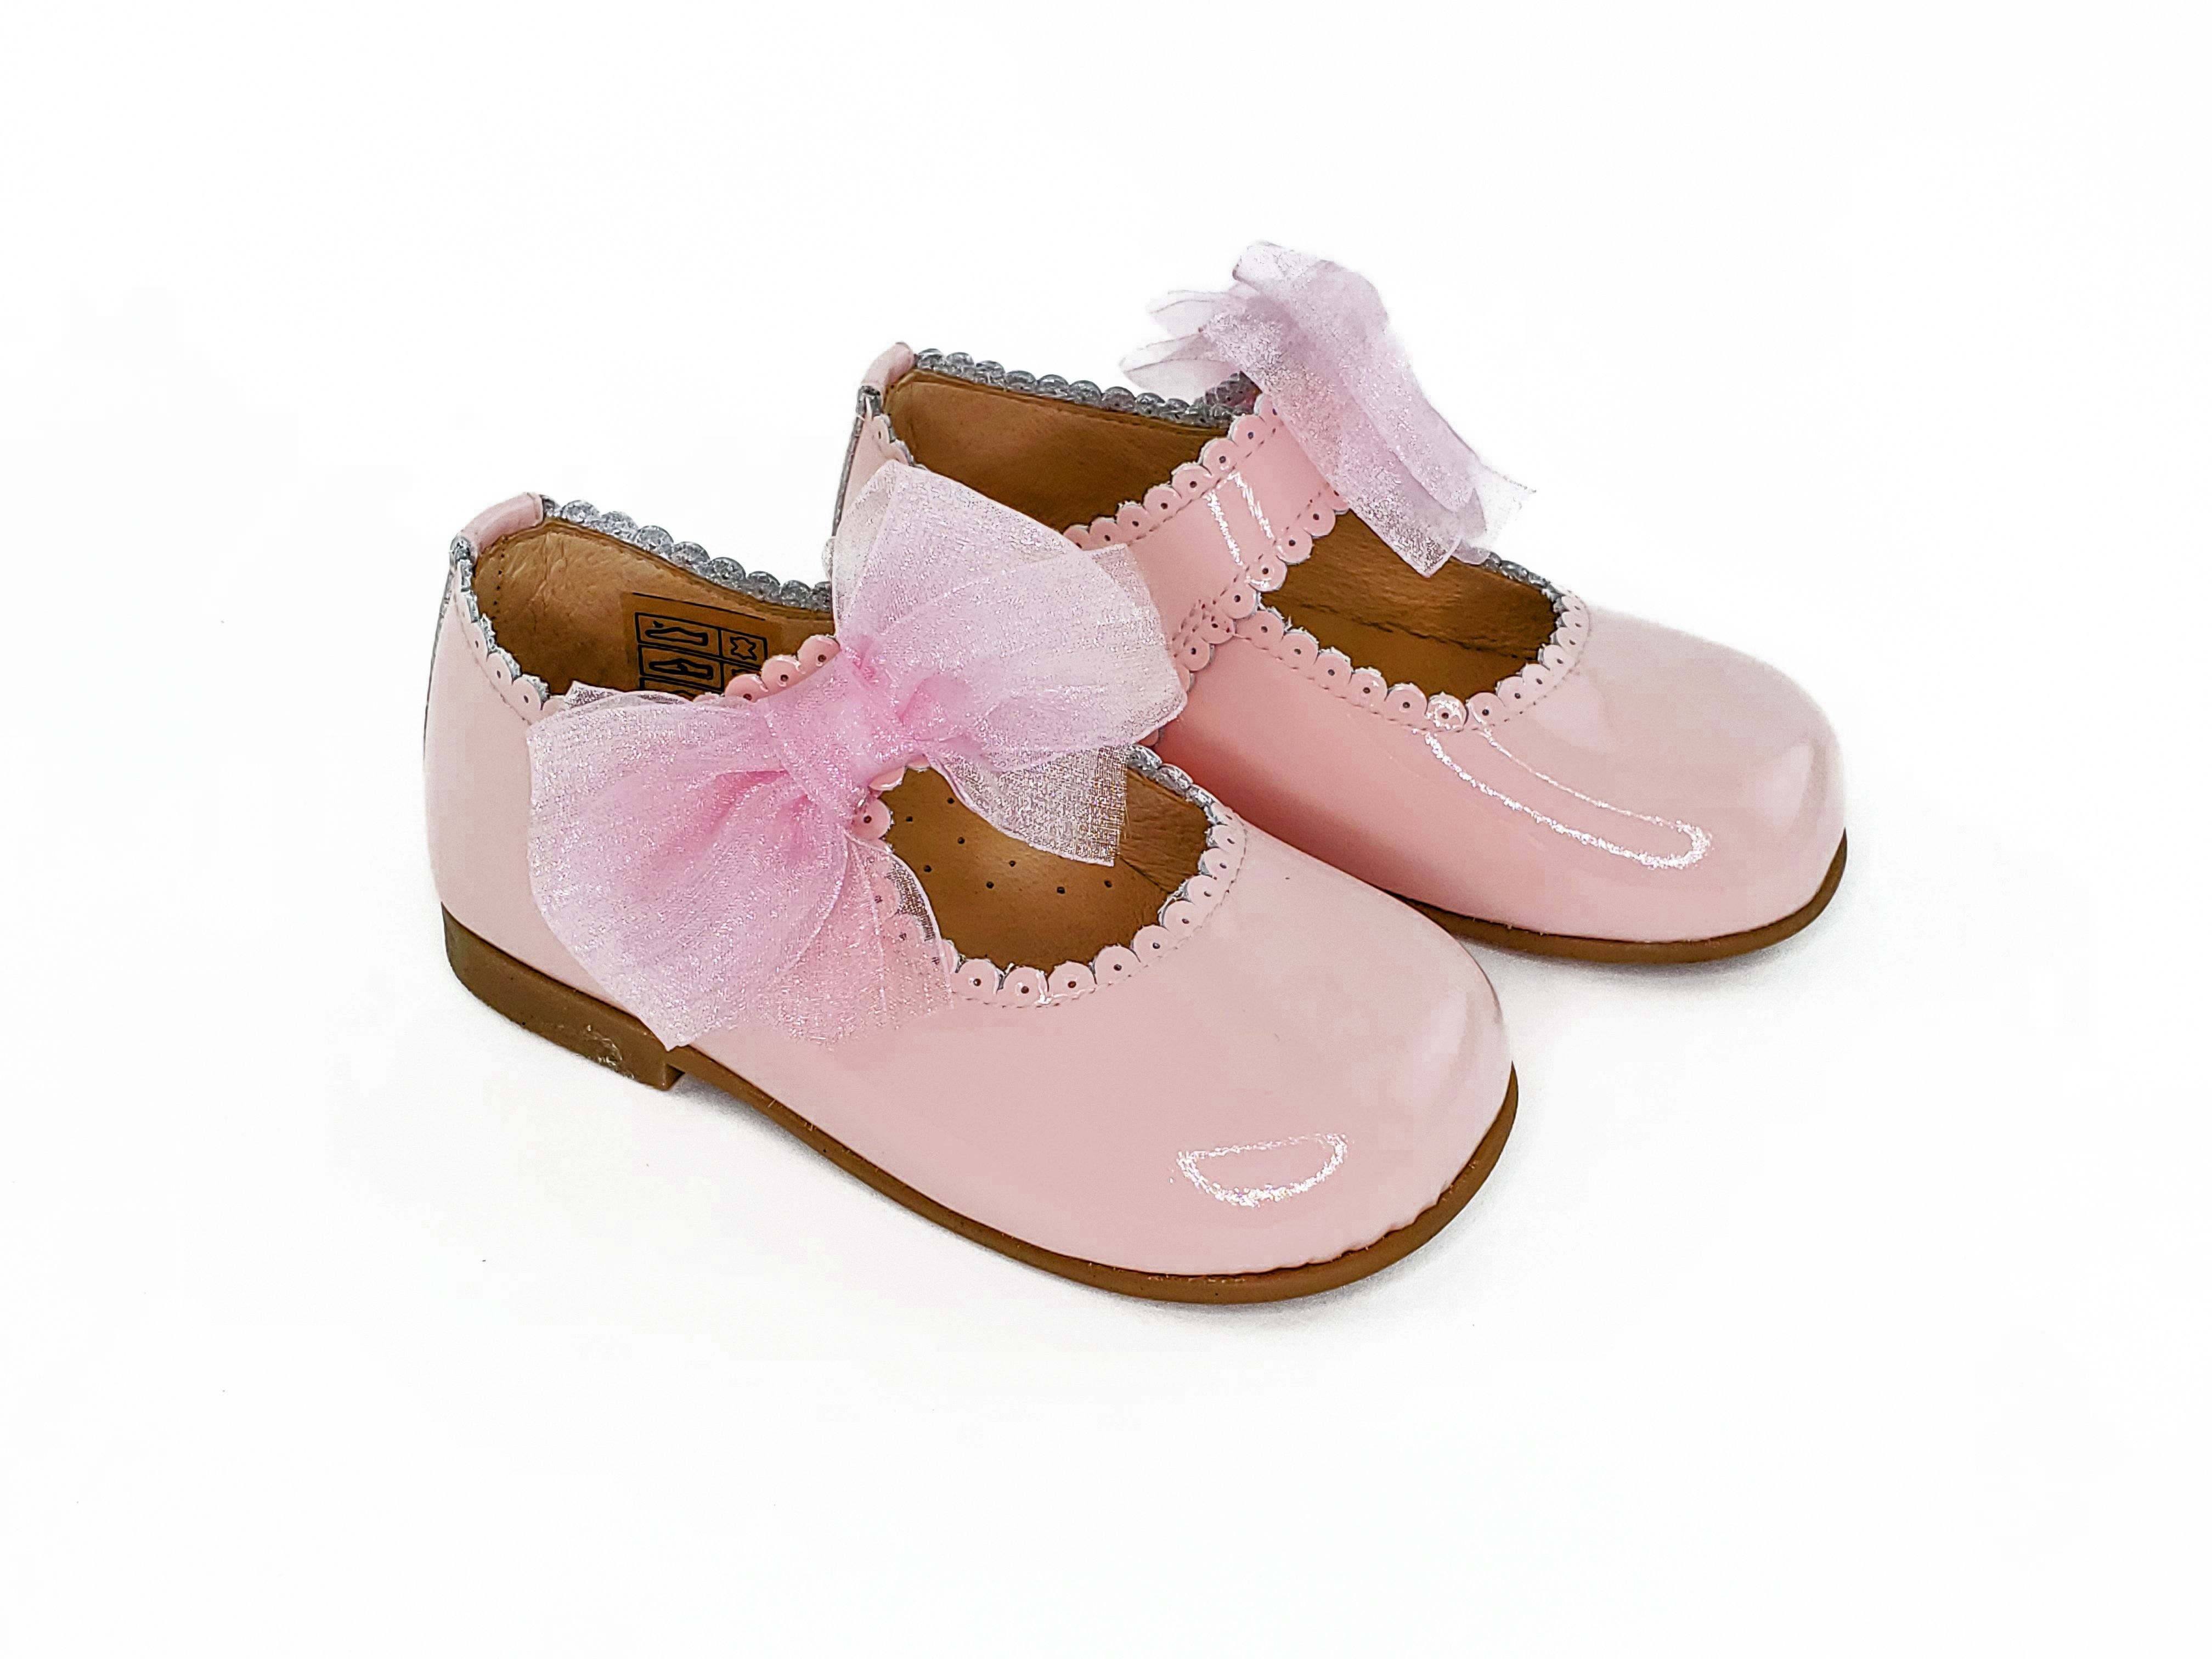 Baby Girl Pink Patent Tule Bow Scalloped Mary Janes Shoes-Girl's Shoes-Girl's Shoes Store Girls Shoes Alfa Baby Boutique 5 Pink Female Shoes-Right Side View